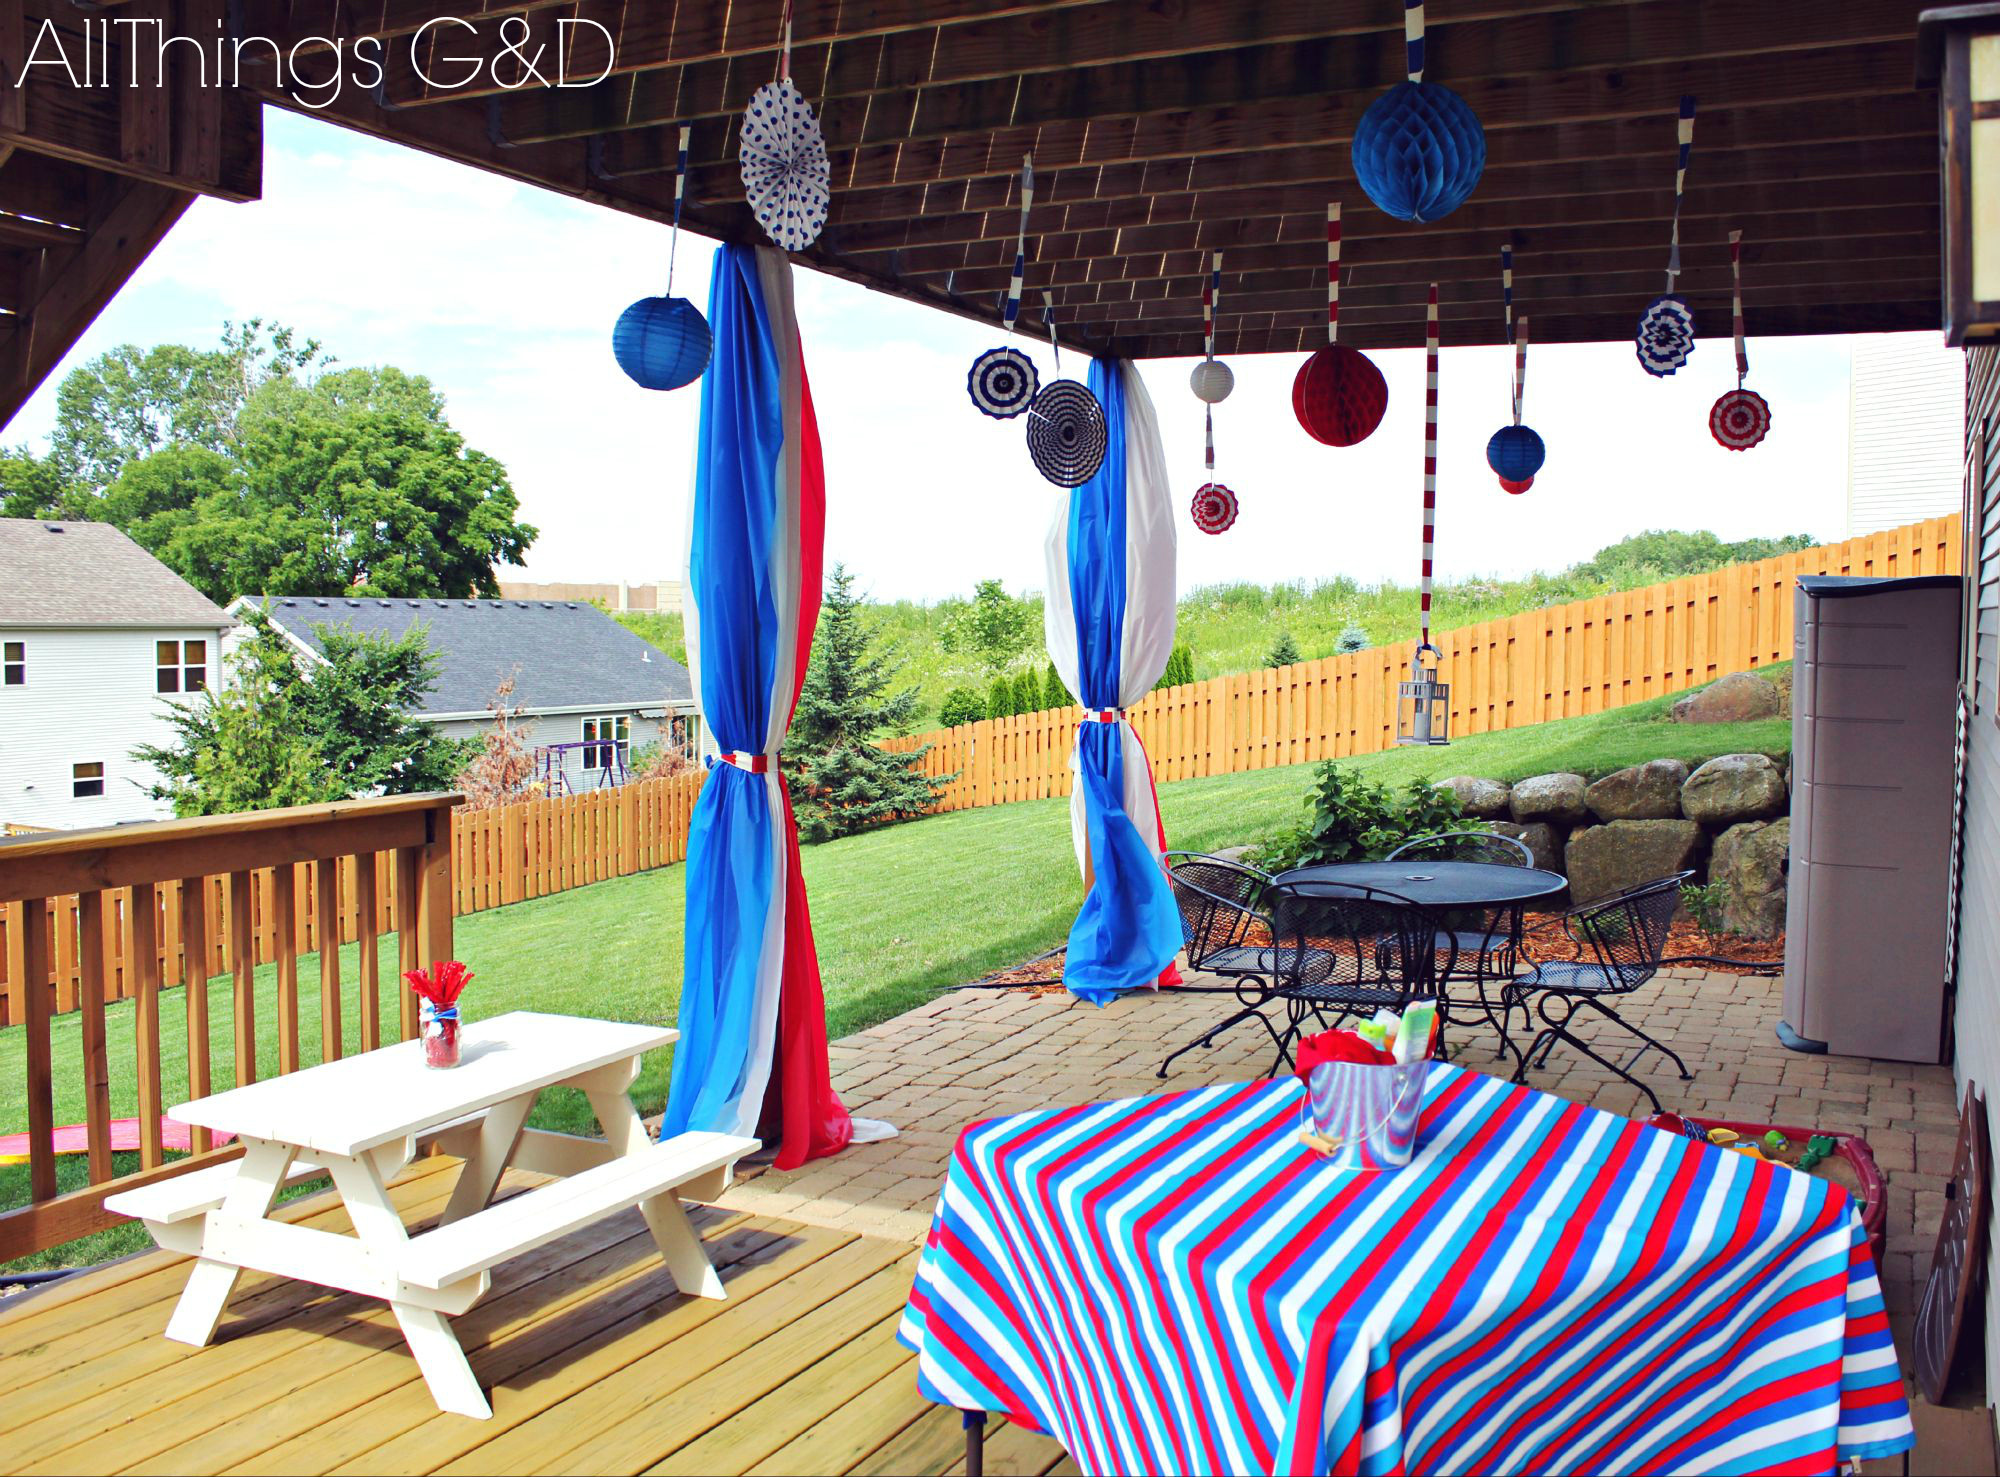 Fourth Of July Backyard Party Ideas
 Our 8th Annual 4th of July Party All Things G&D